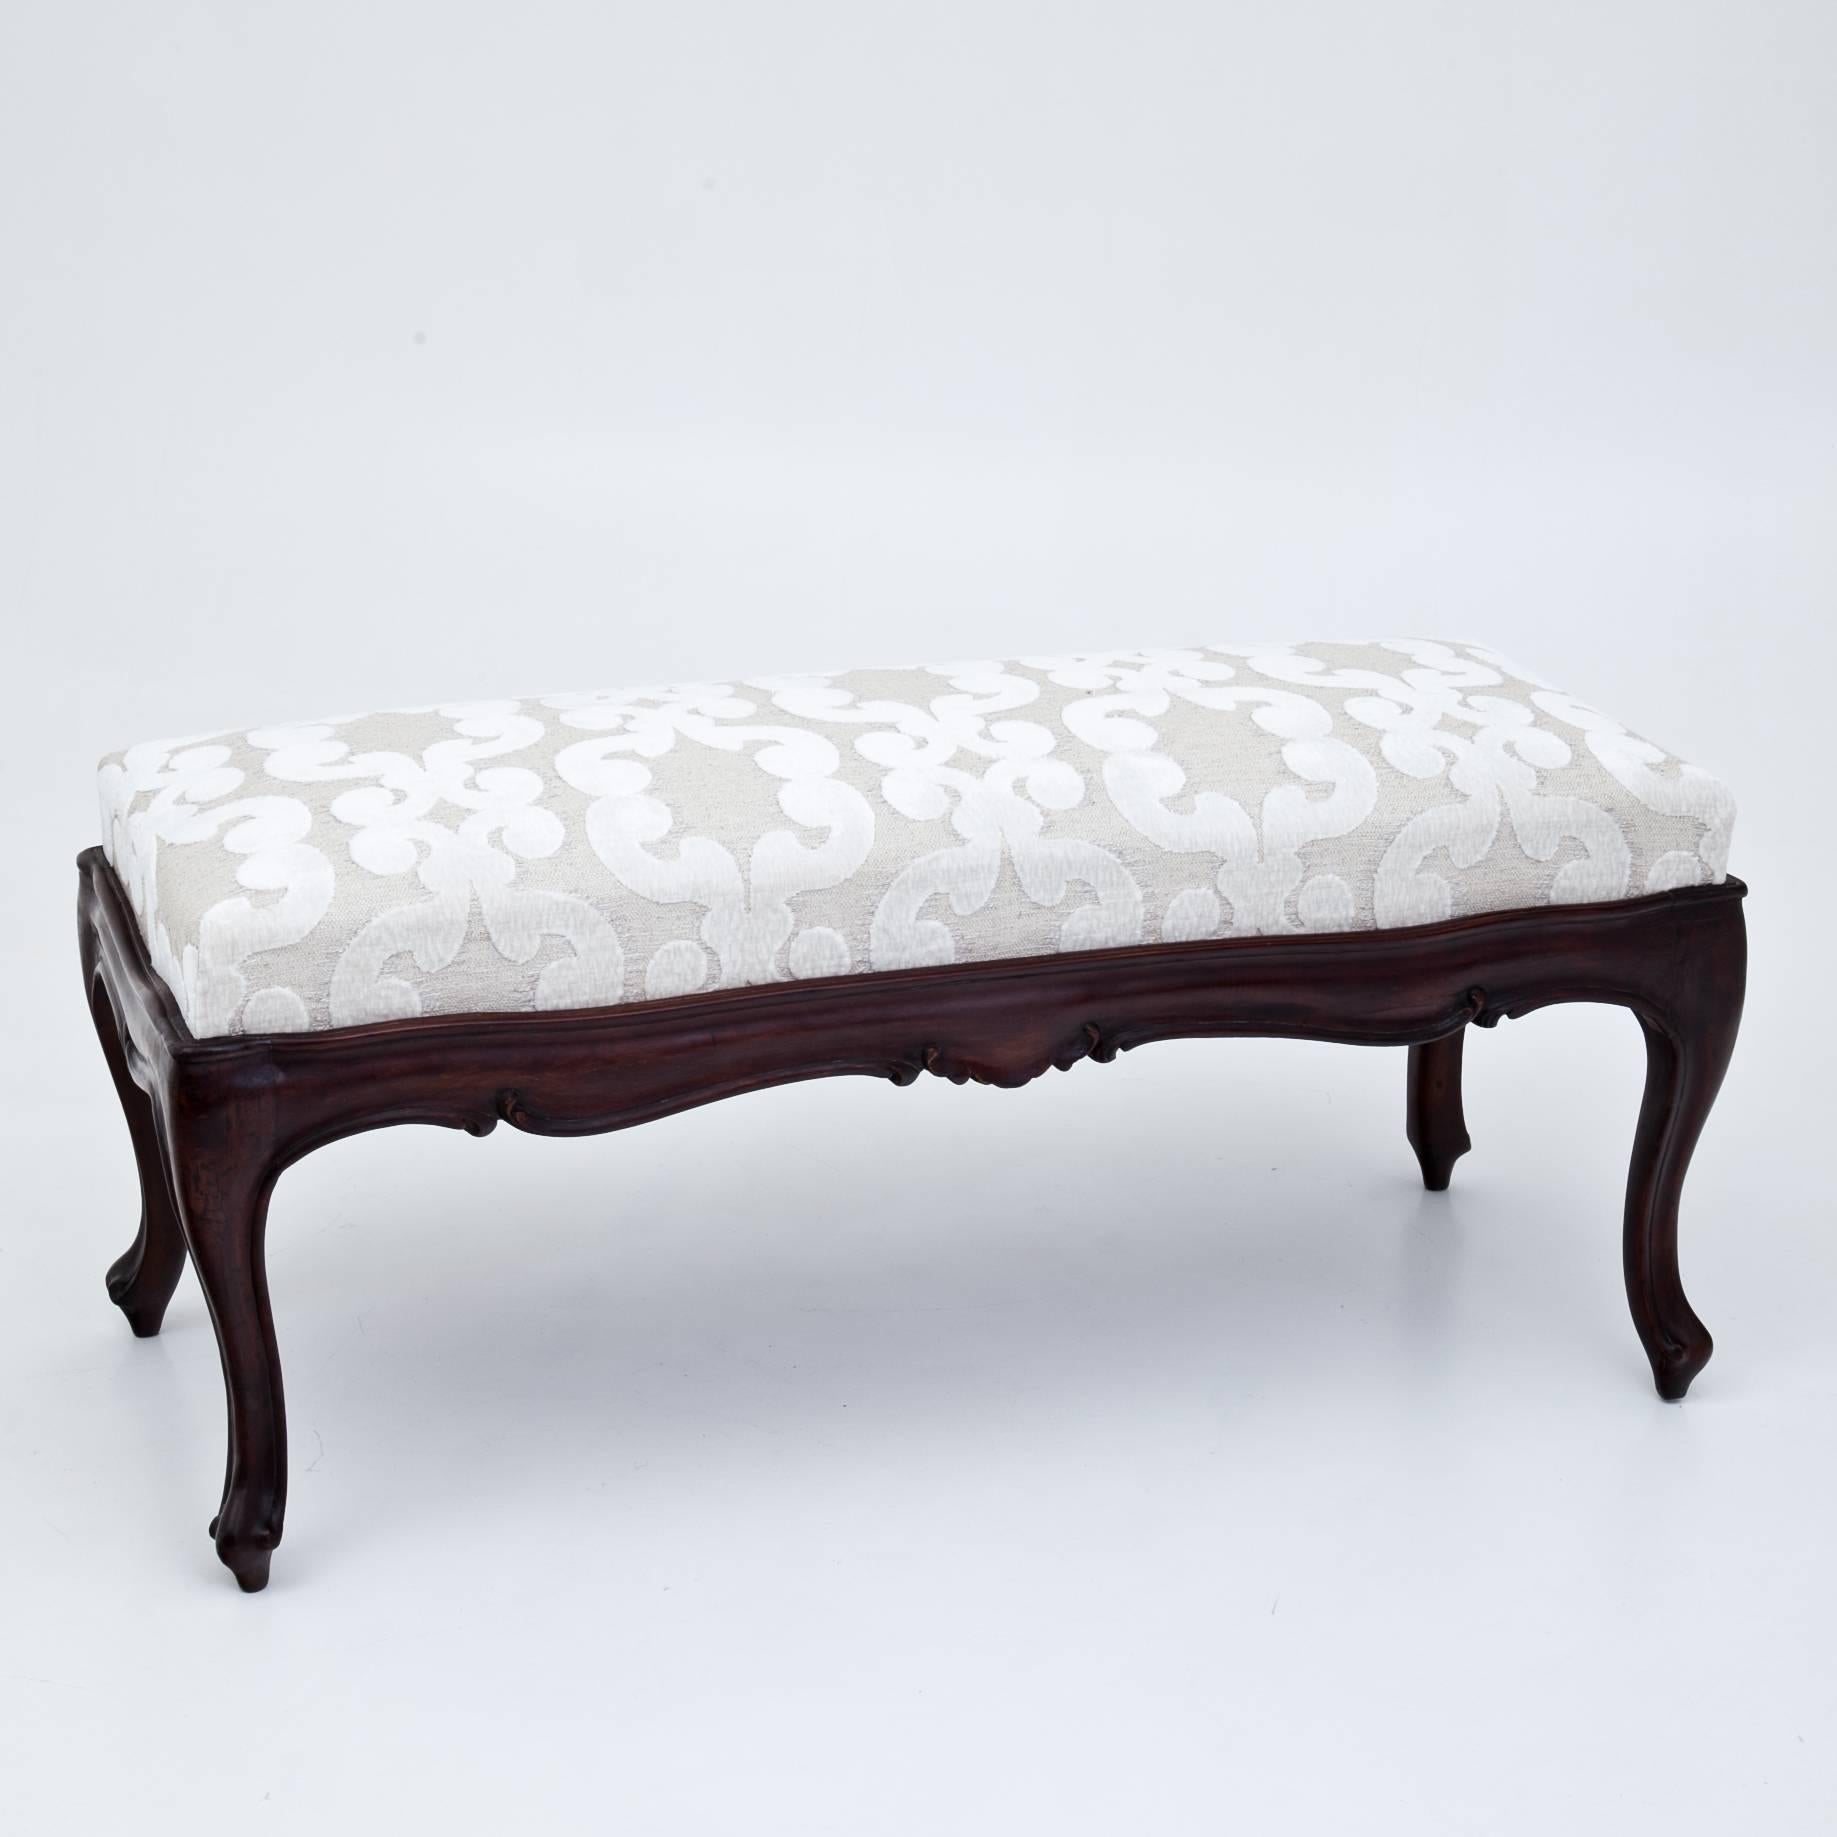 Small baroque style bench with a carved rail. The bench serves two people and was reupholstered with a high-quality crème-white fabric.
Measures: Frame height 39 cm.